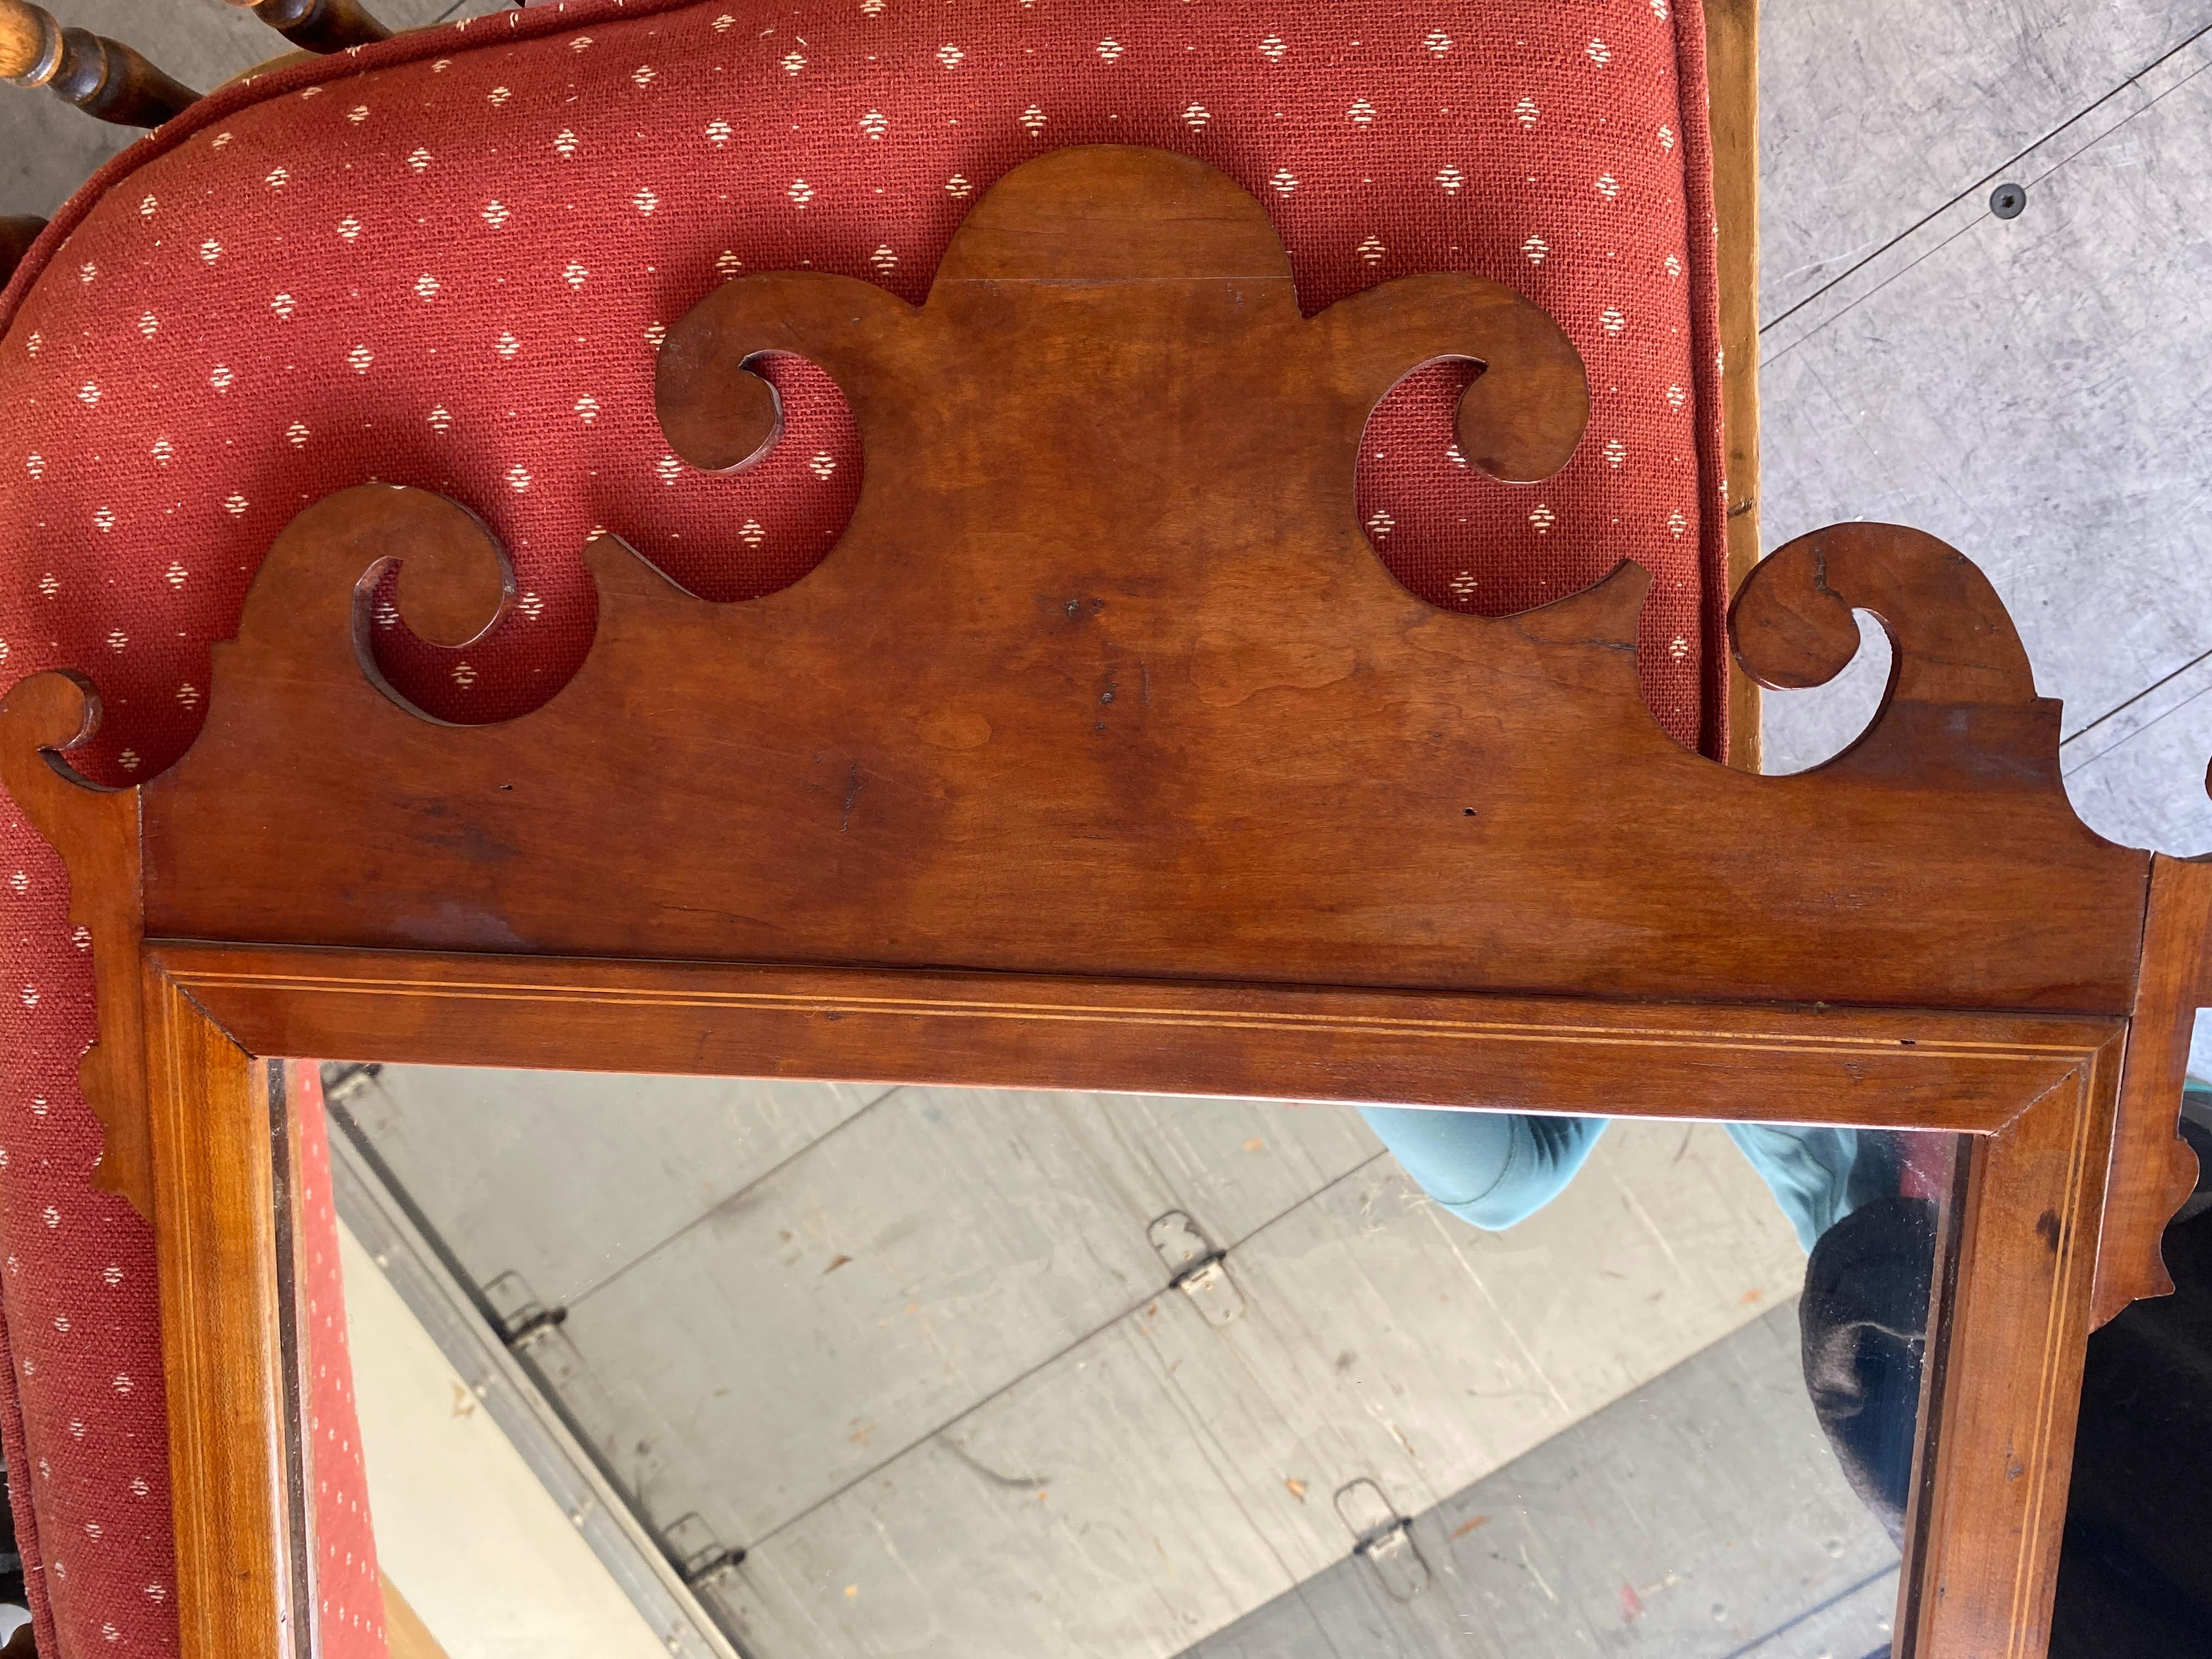 Very fine quality Antique English George III Walnut mirror, 18th C. The mirror has a shaped crest with scrolls. The rectangular mirror plate is fitted within a rectangular molded frame above a shaped scrolled apron. Condition is excellent with a